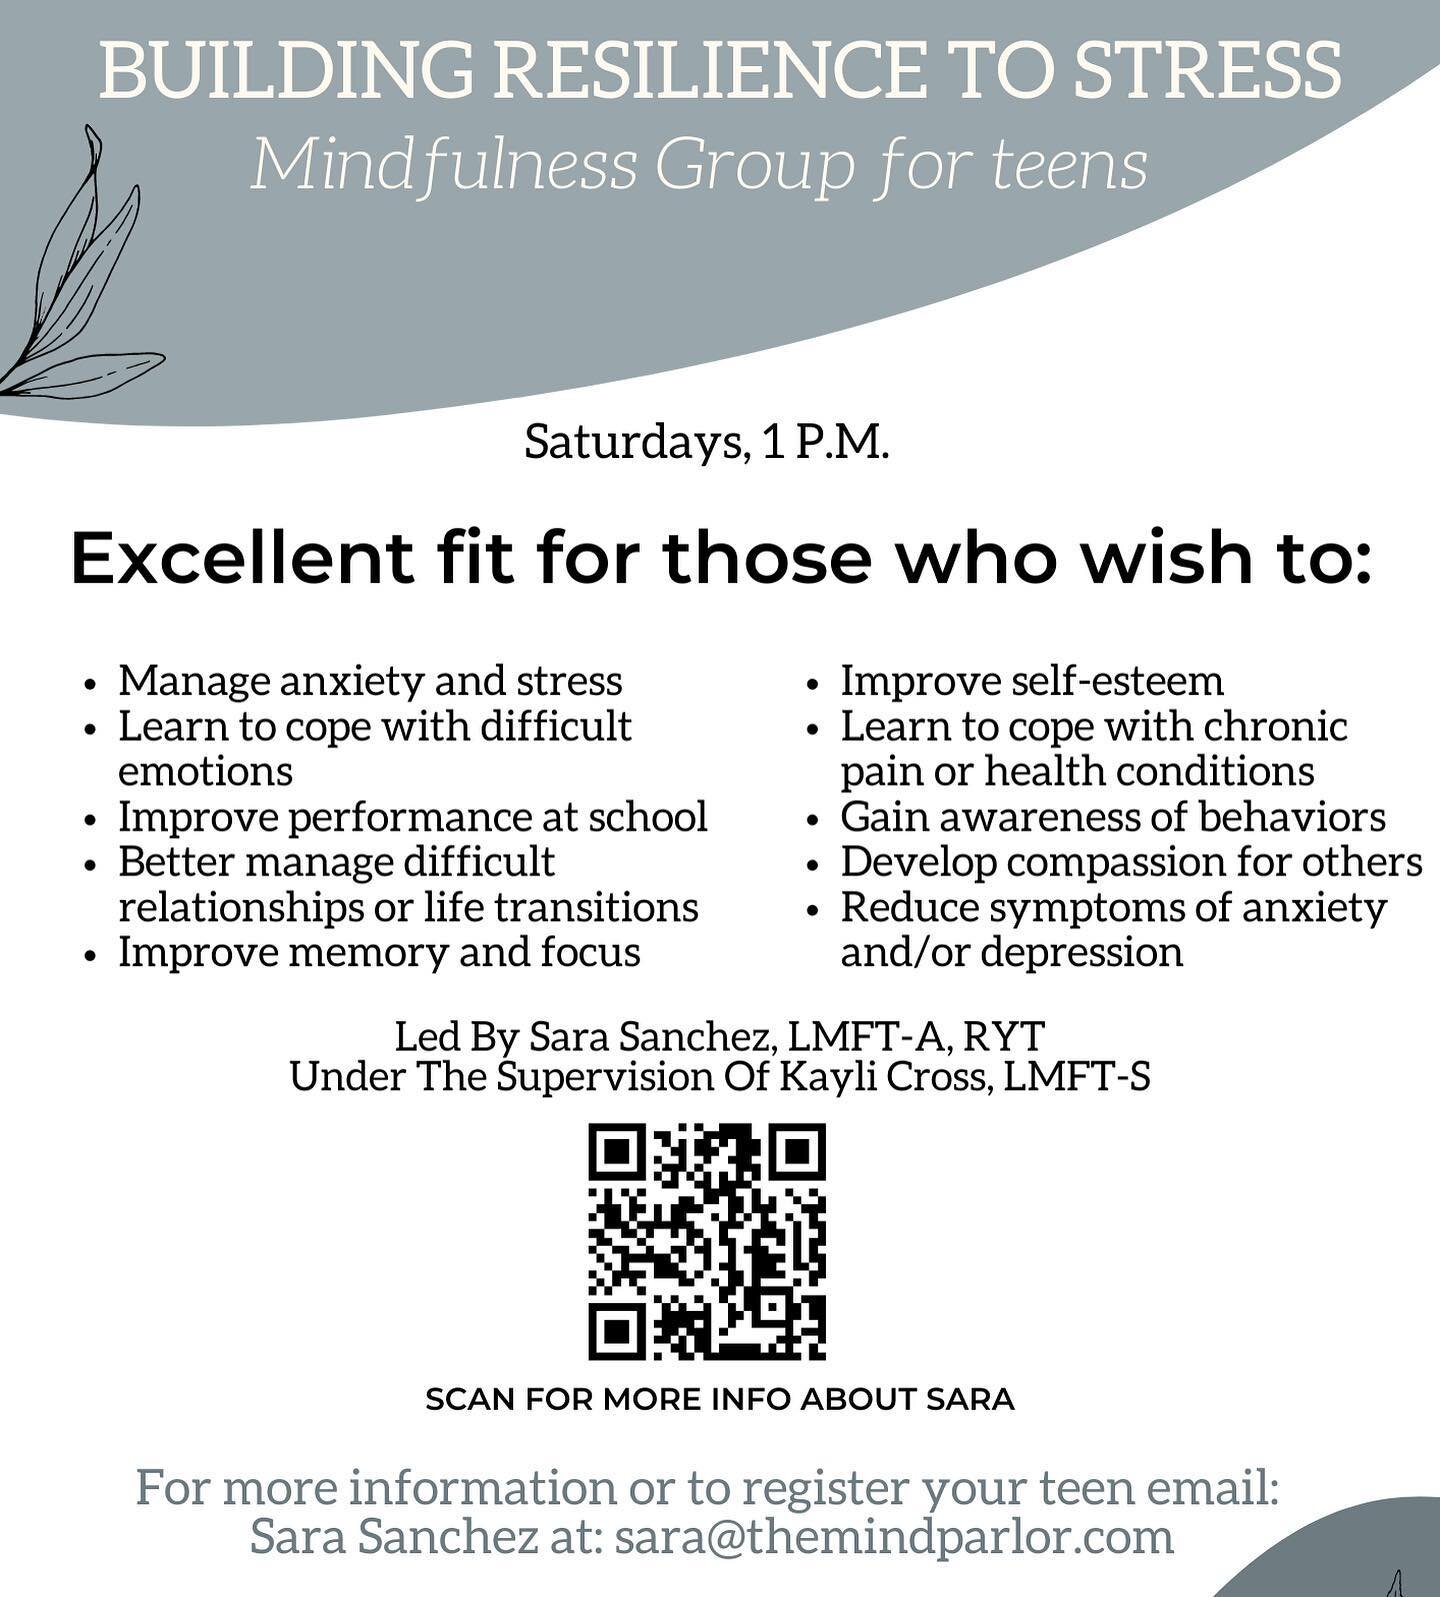 Hey DFW folks! This is an awesome resource for teens led by quite the talented clinician &mdash; Sara Sanchez, LMFTA &mdash; who offices over at @themindparlor &mdash; holler at her for more info if you&rsquo;re interested in this group or know of so